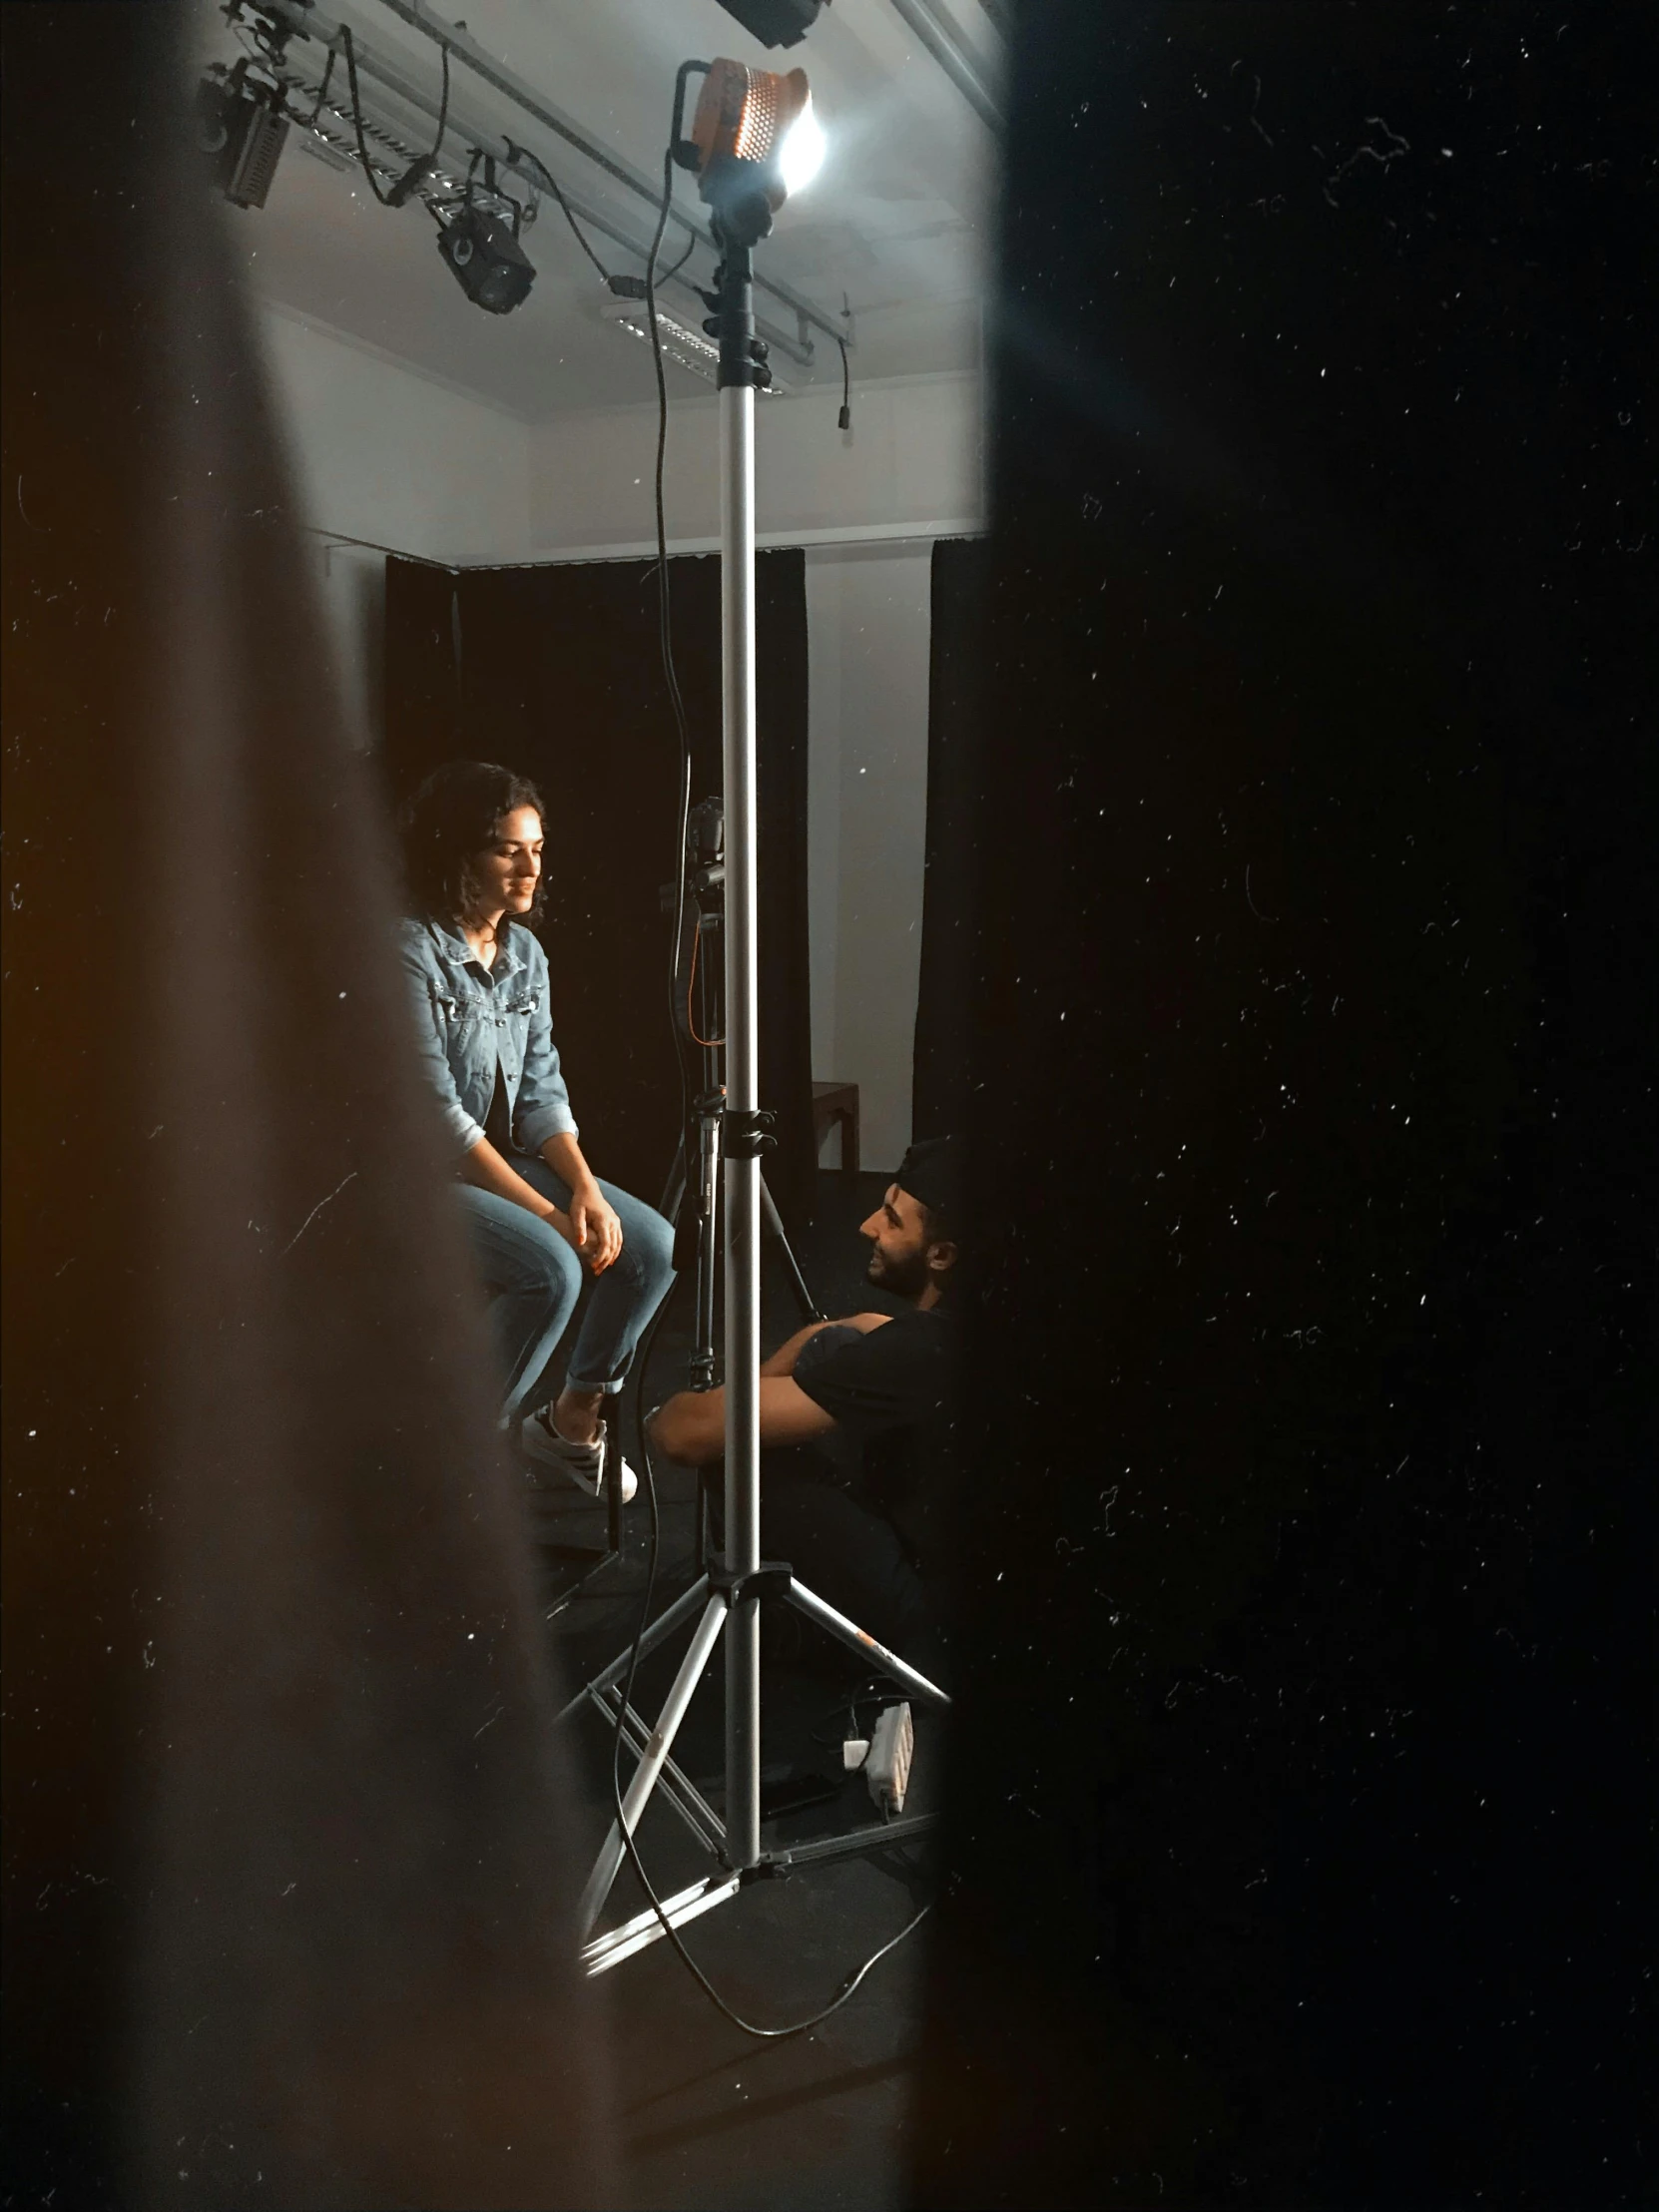 a man sitting on a chair in front of a camera, in the space, lighting her with a rim light, production ig studios, full body 8k